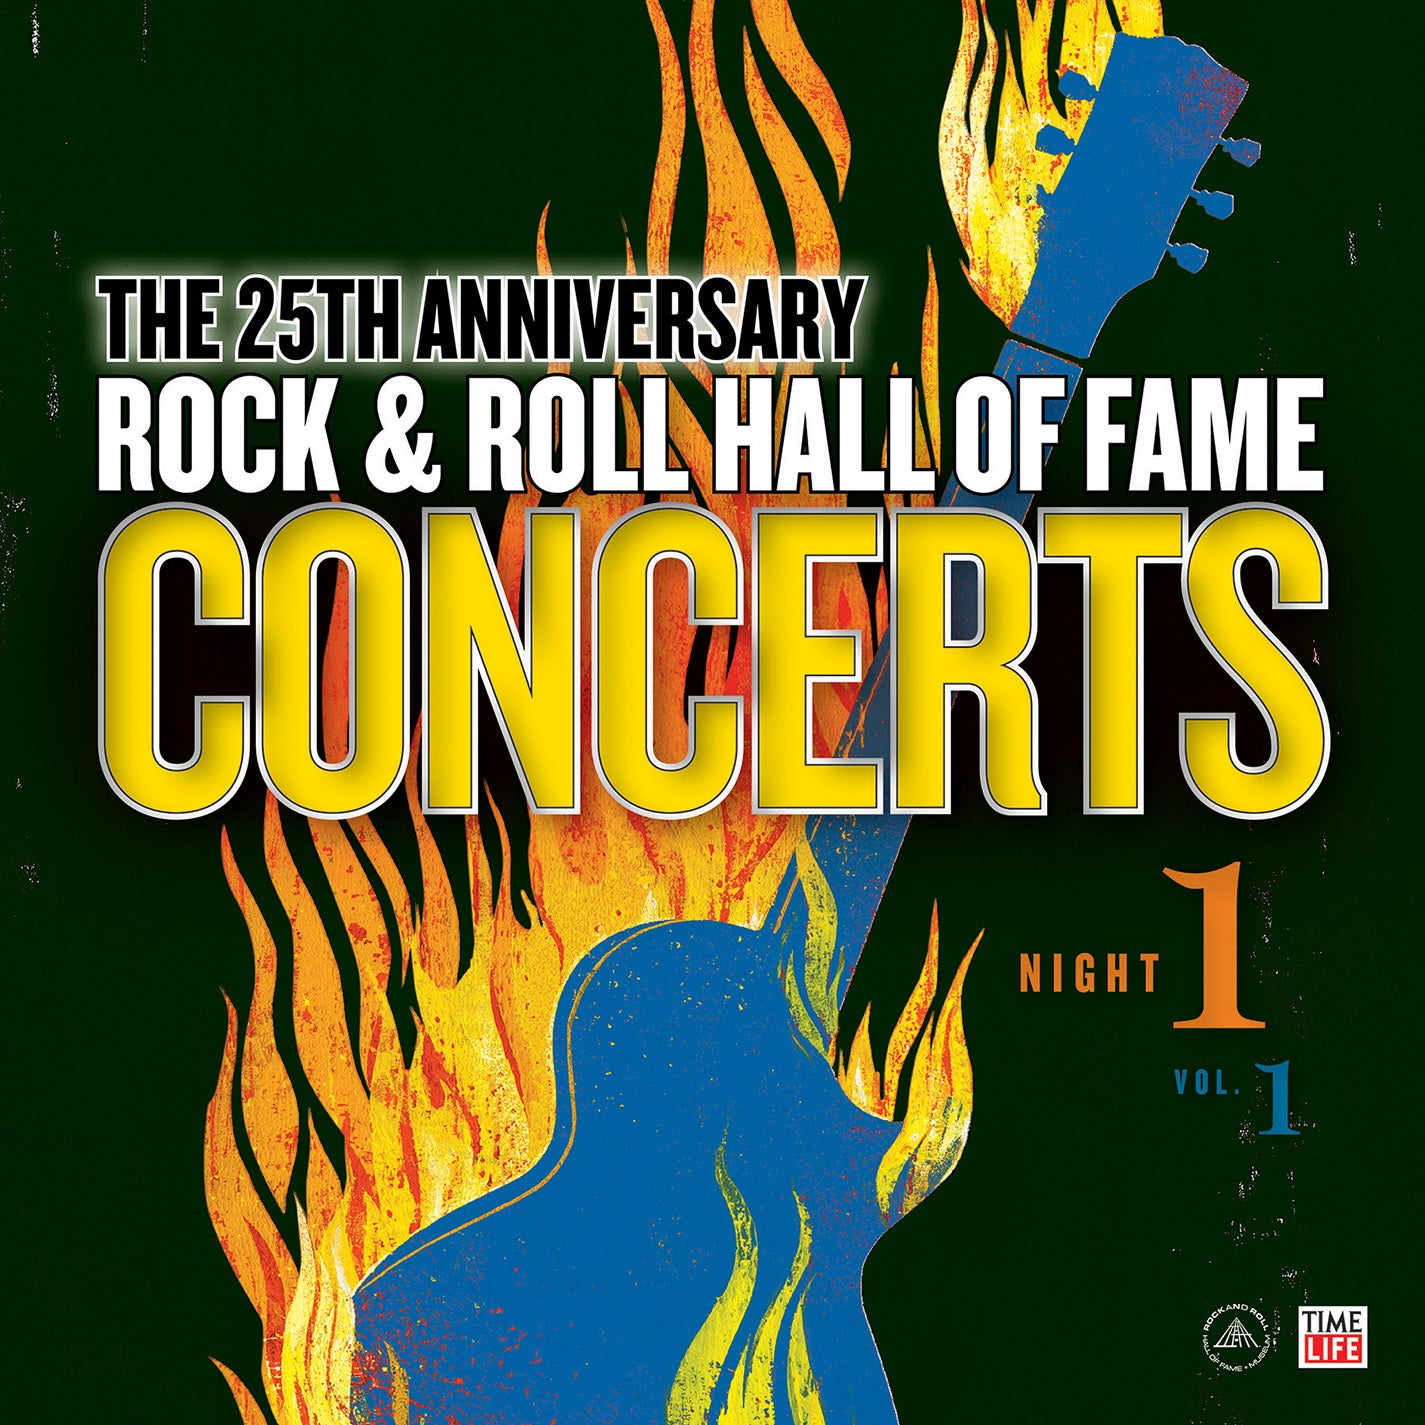 Various Artists - The 25th Anniversary Rock & Roll Hall of Fame Concerts Night 1 - Vol. 1